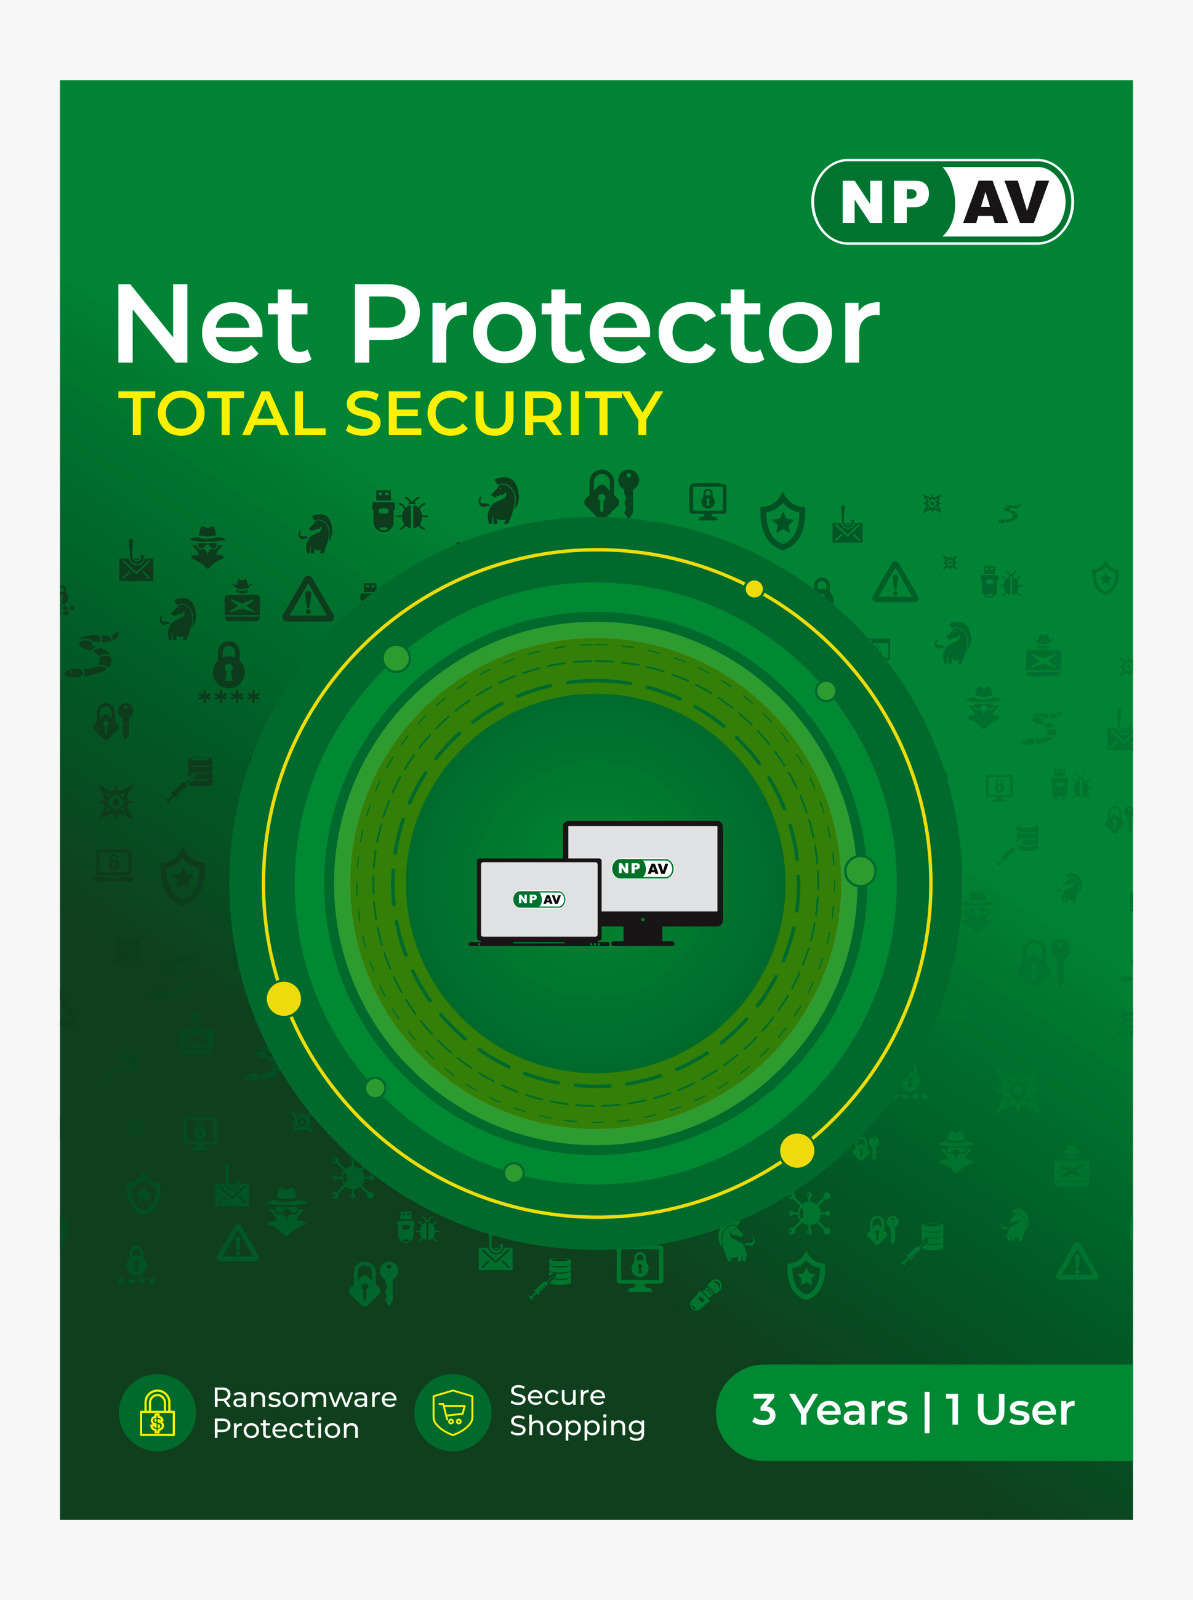 NP TOTAL SECURITY
1 USER 3 YEARS